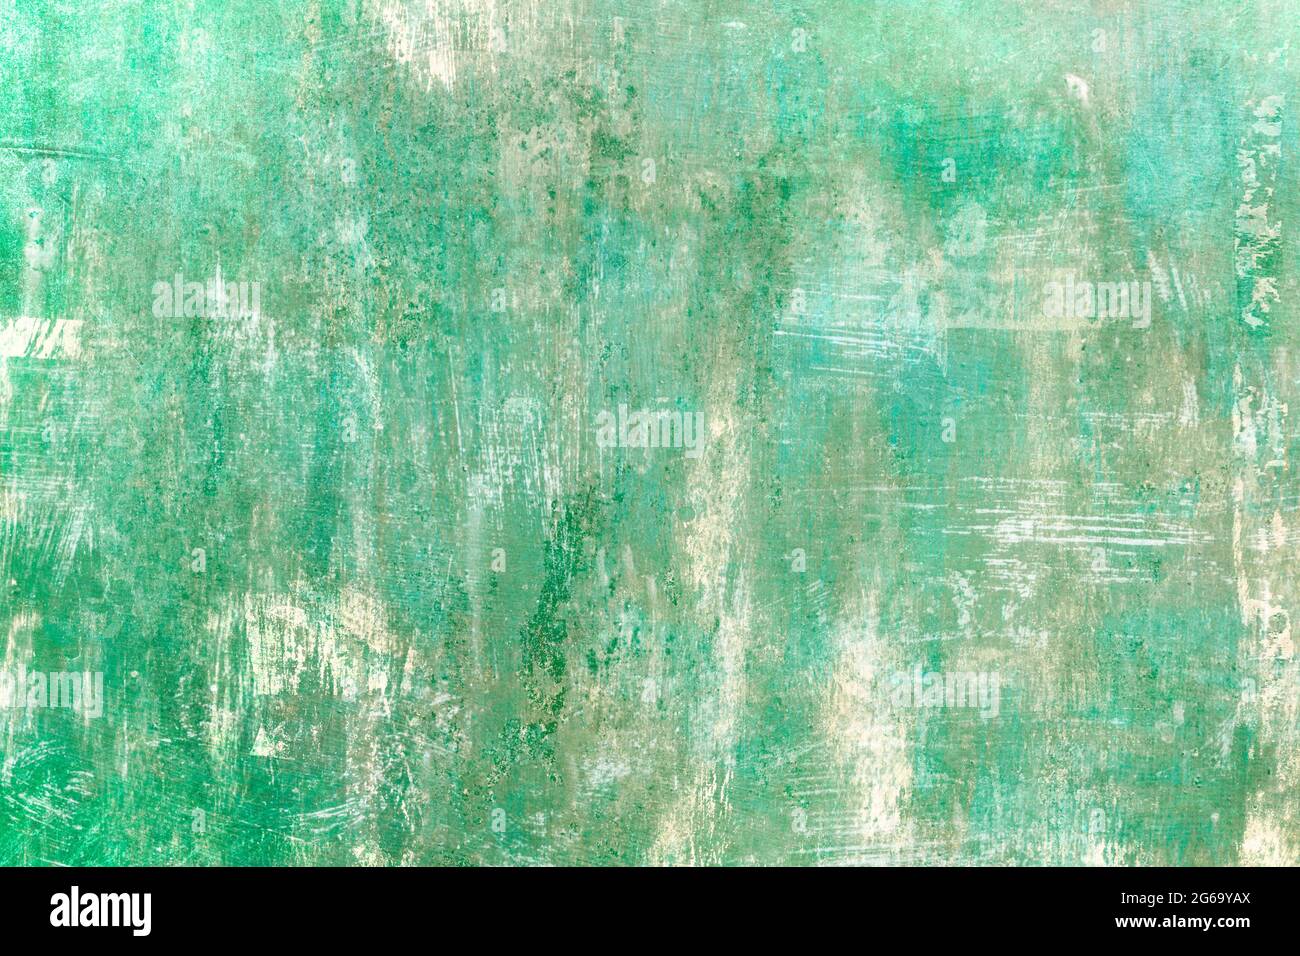 Green distressed backdrop grunge background or texture Stock Photo